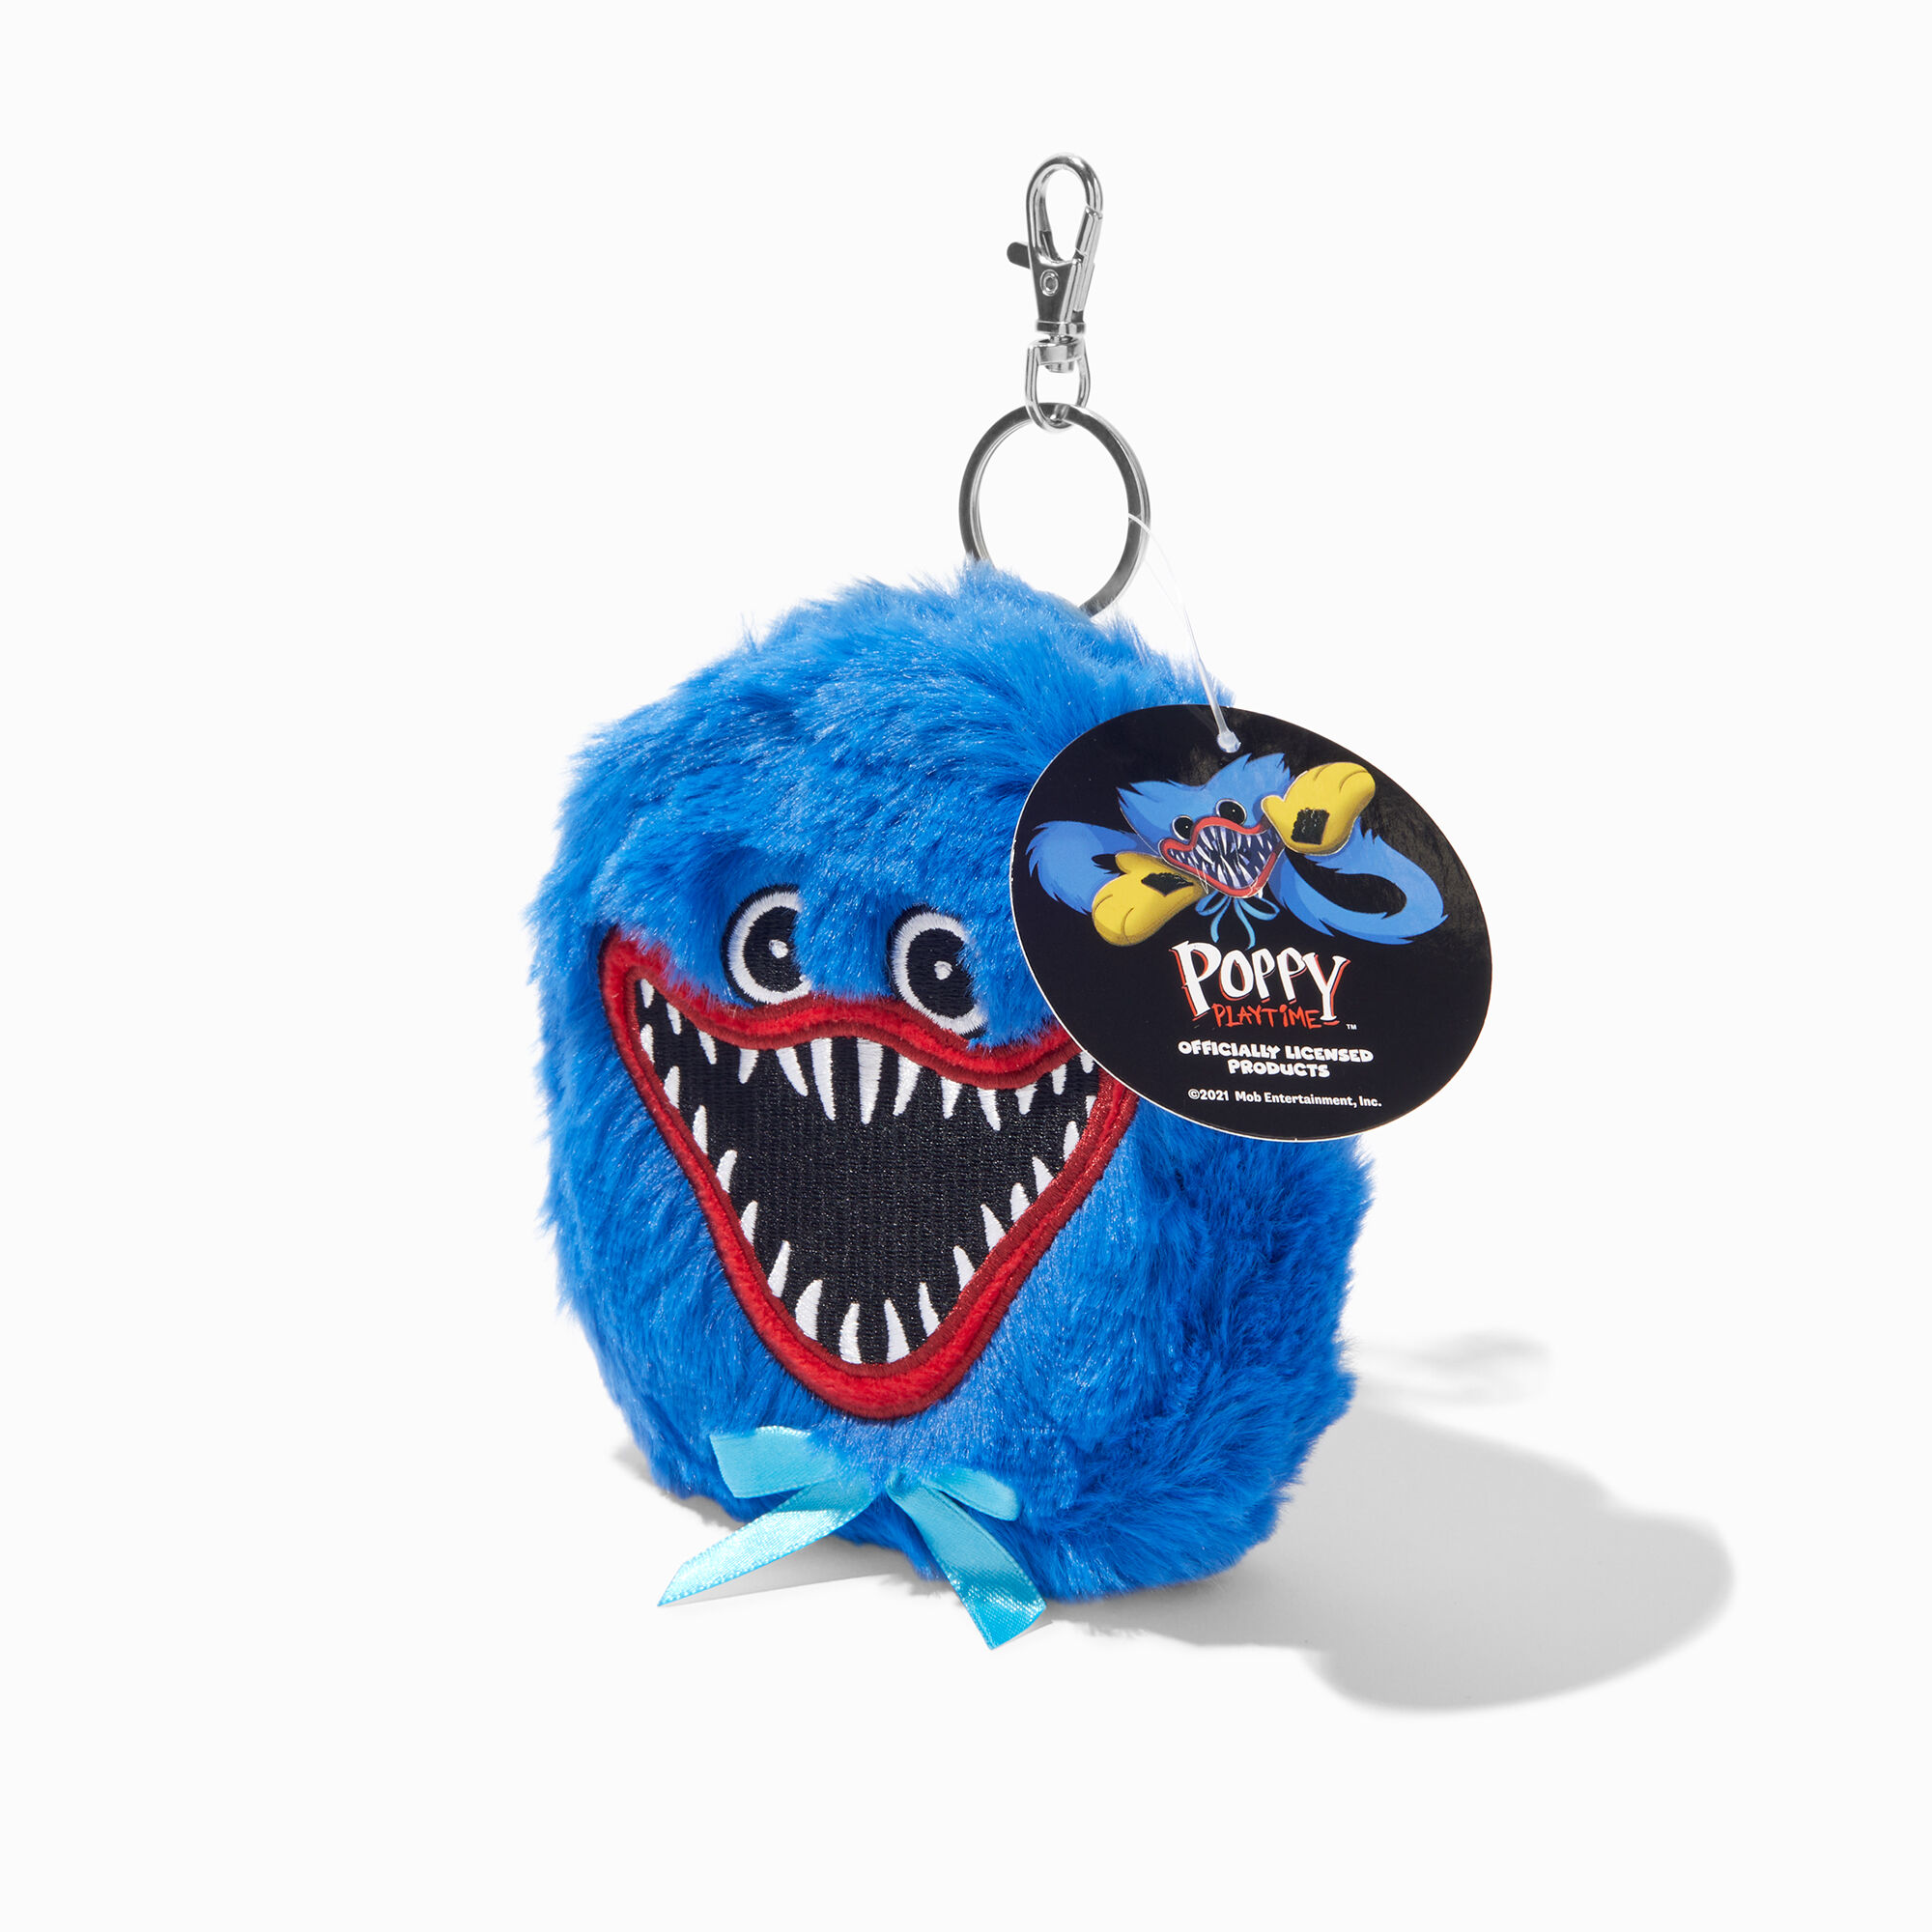 View Claires Poppys Playtime Plush Mini Backpack Keyring information